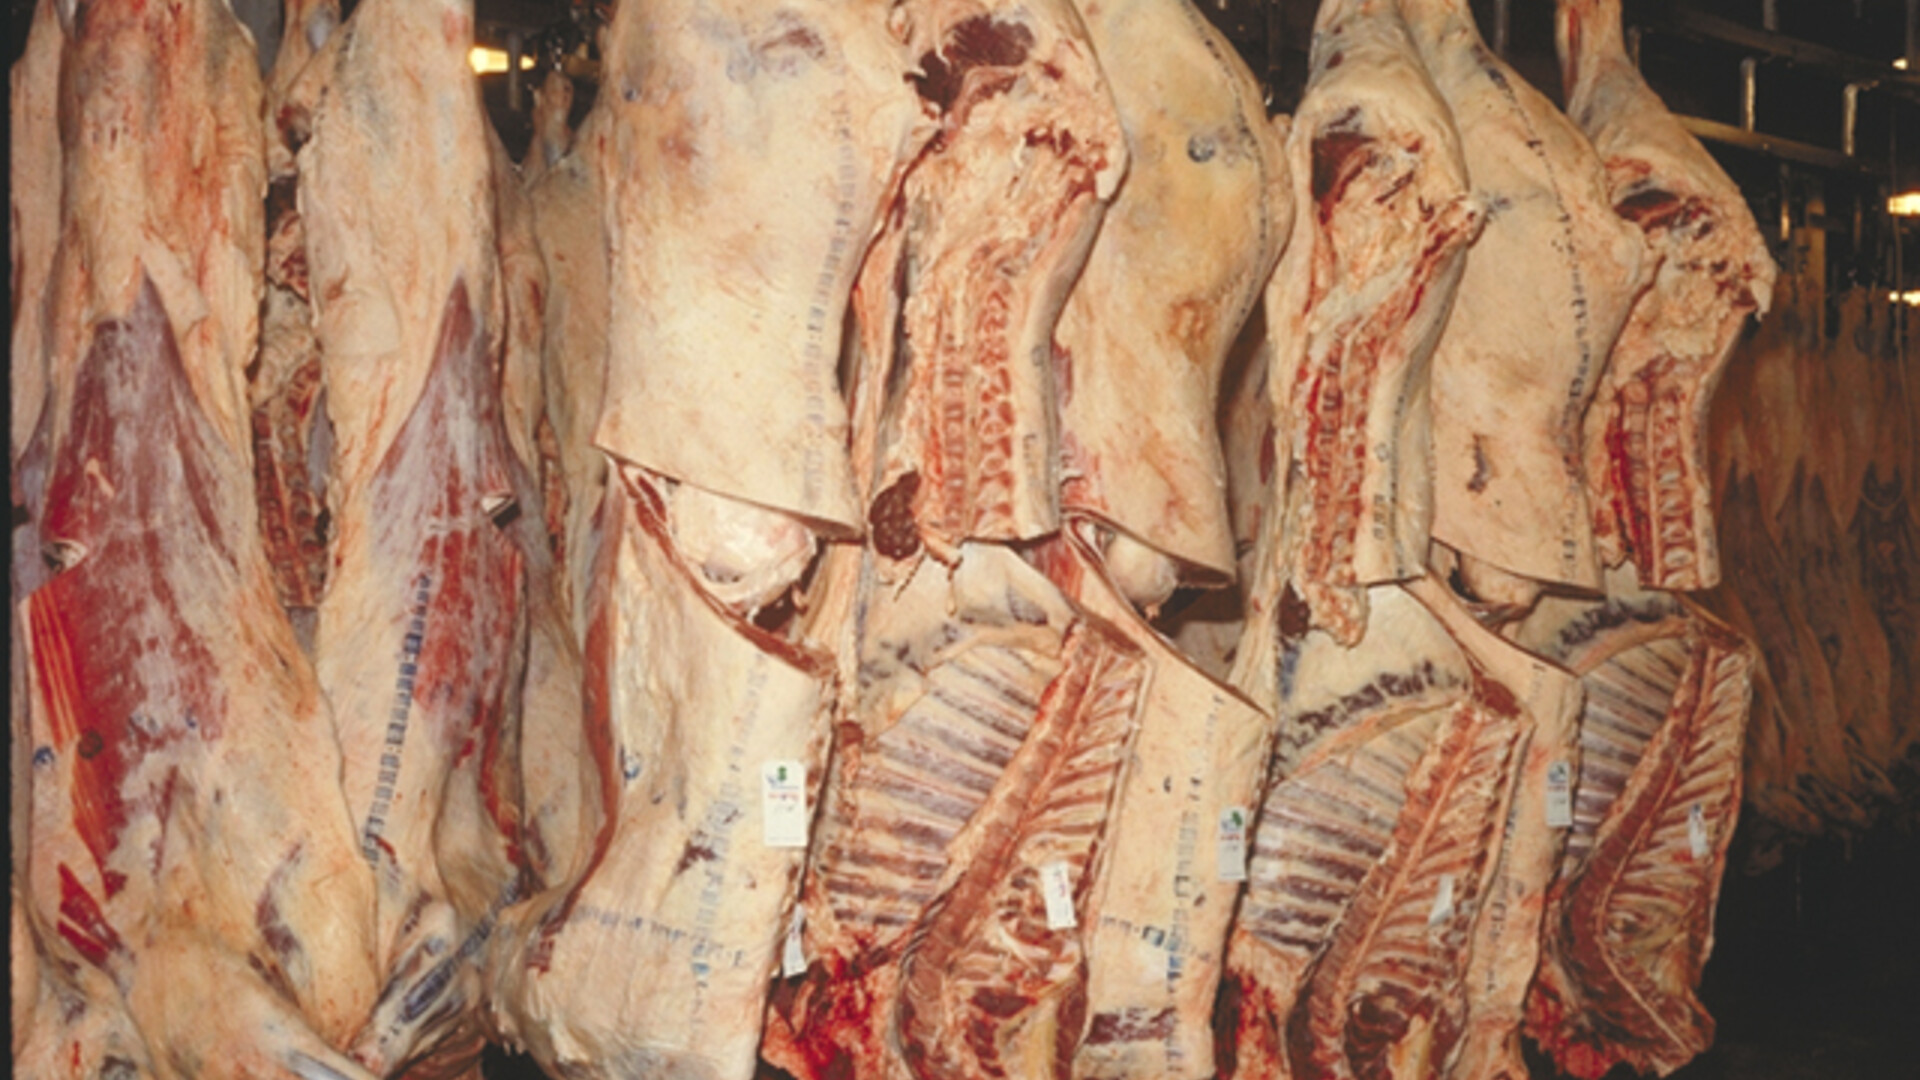 Beef Continues to Post Eye-Popping Export Numbers